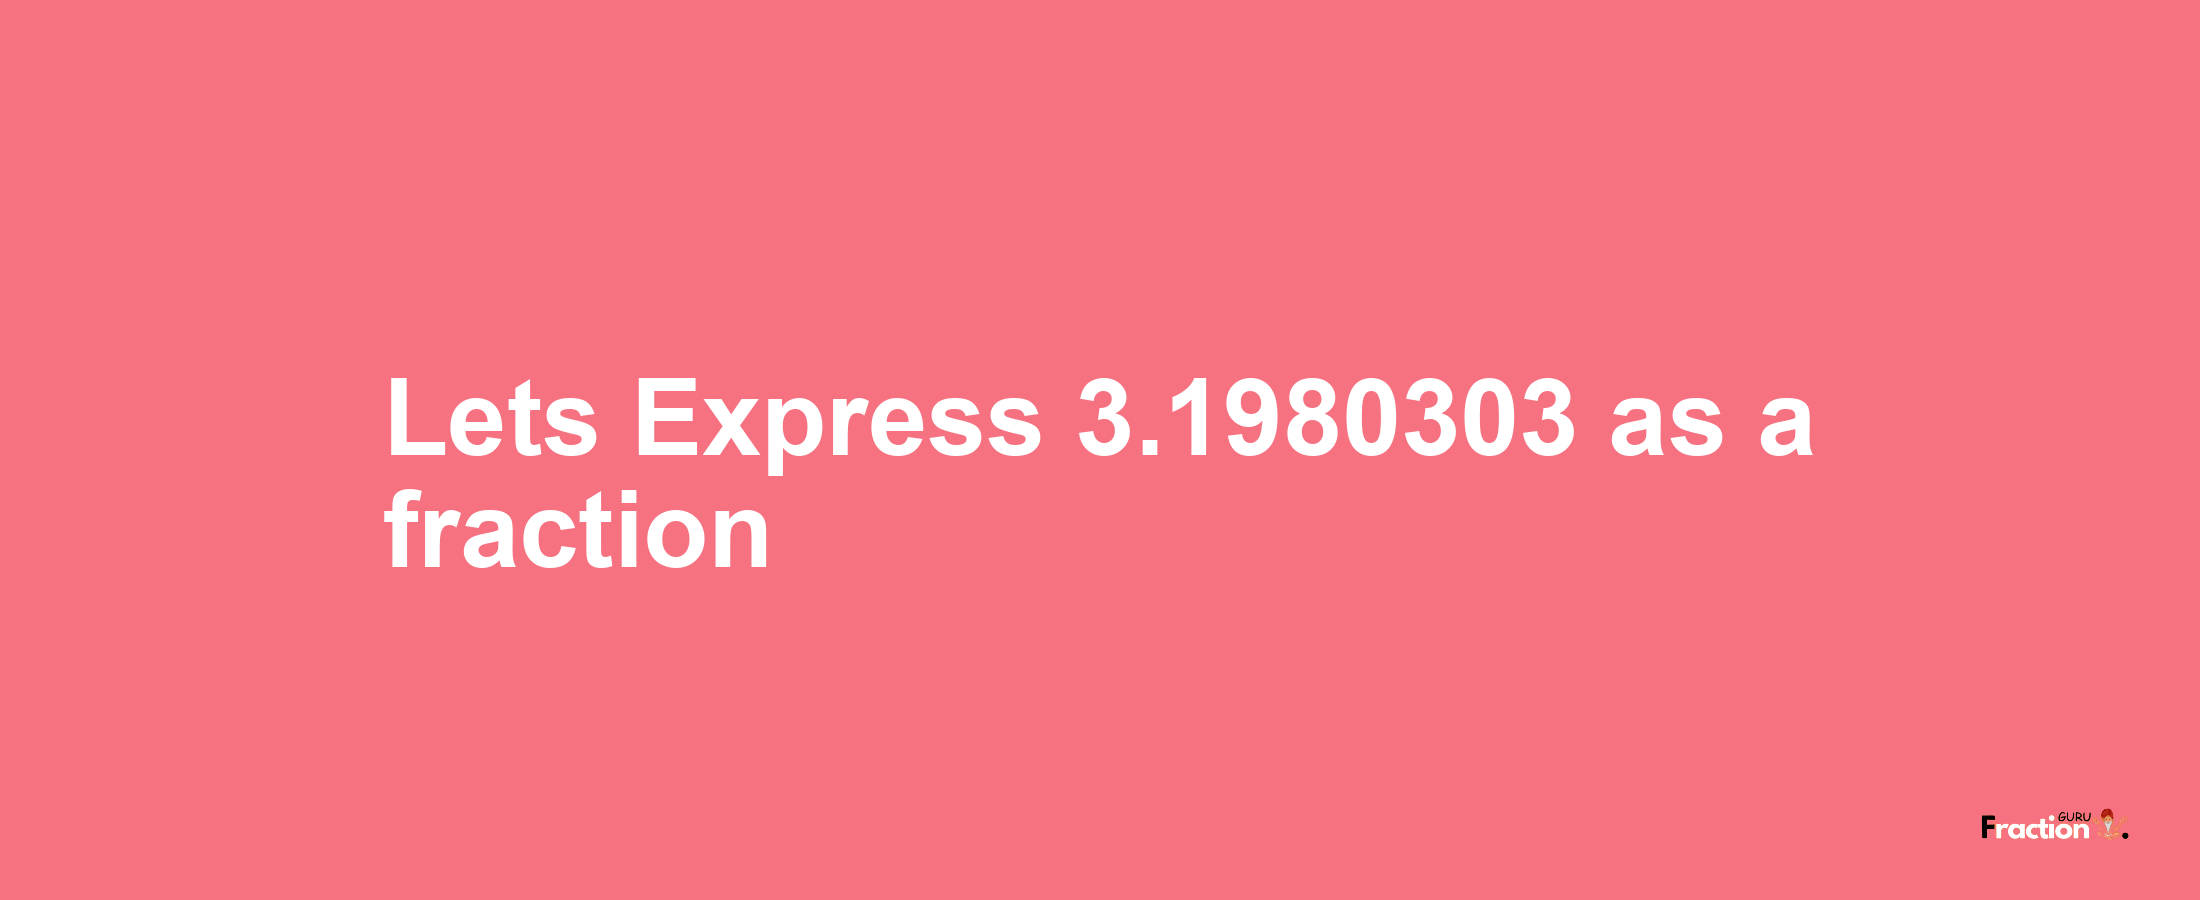 Lets Express 3.1980303 as afraction